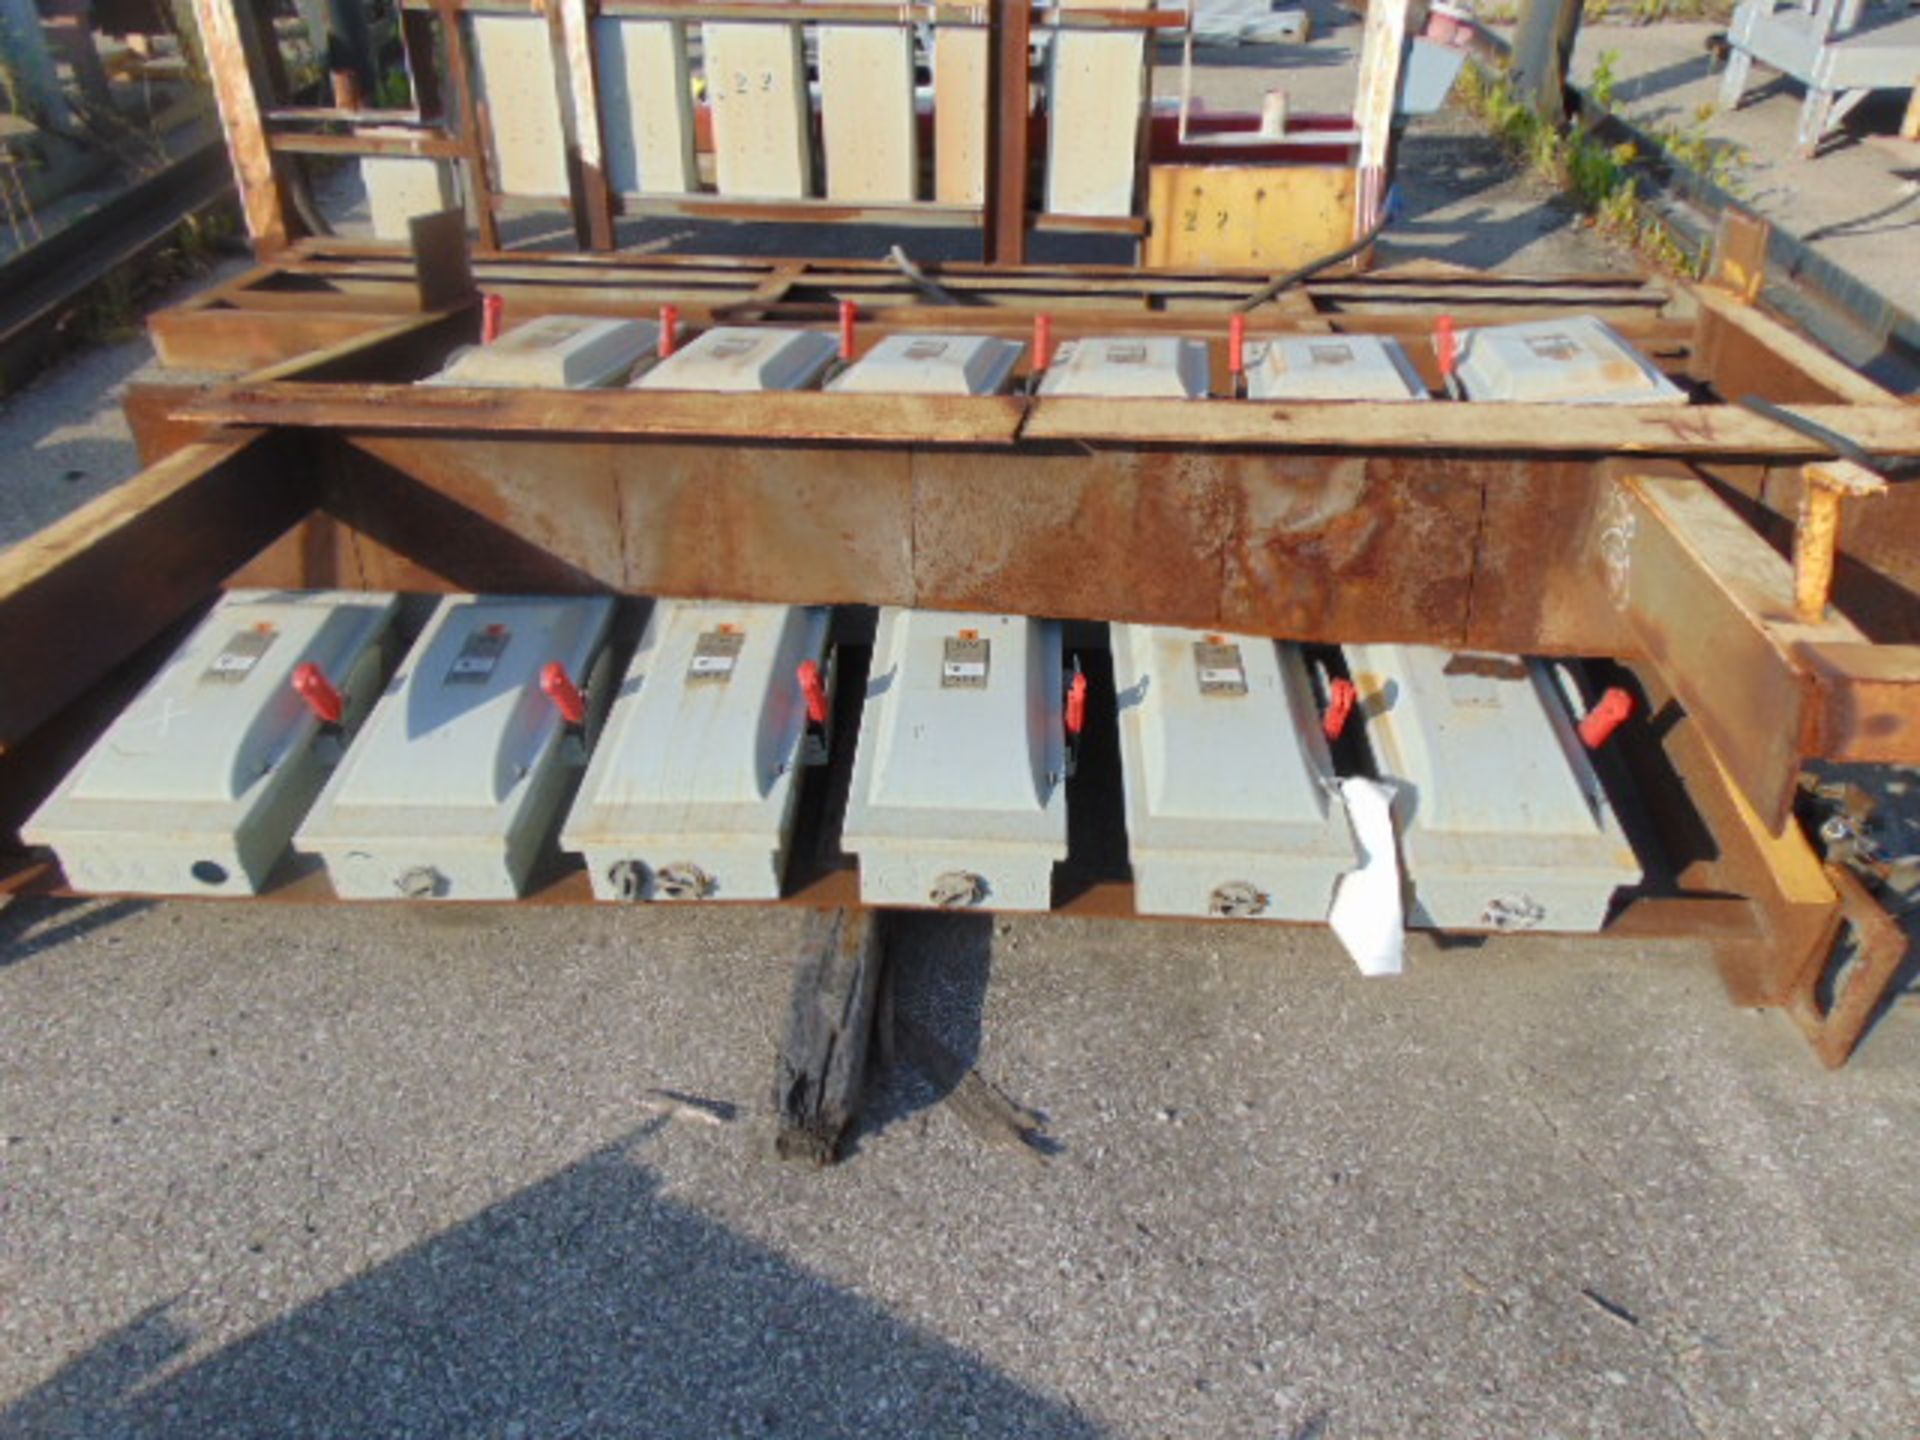 LOT CONSISTING OF: disconnect boxes & misc. electrical, assorted (in one row) - Image 3 of 11